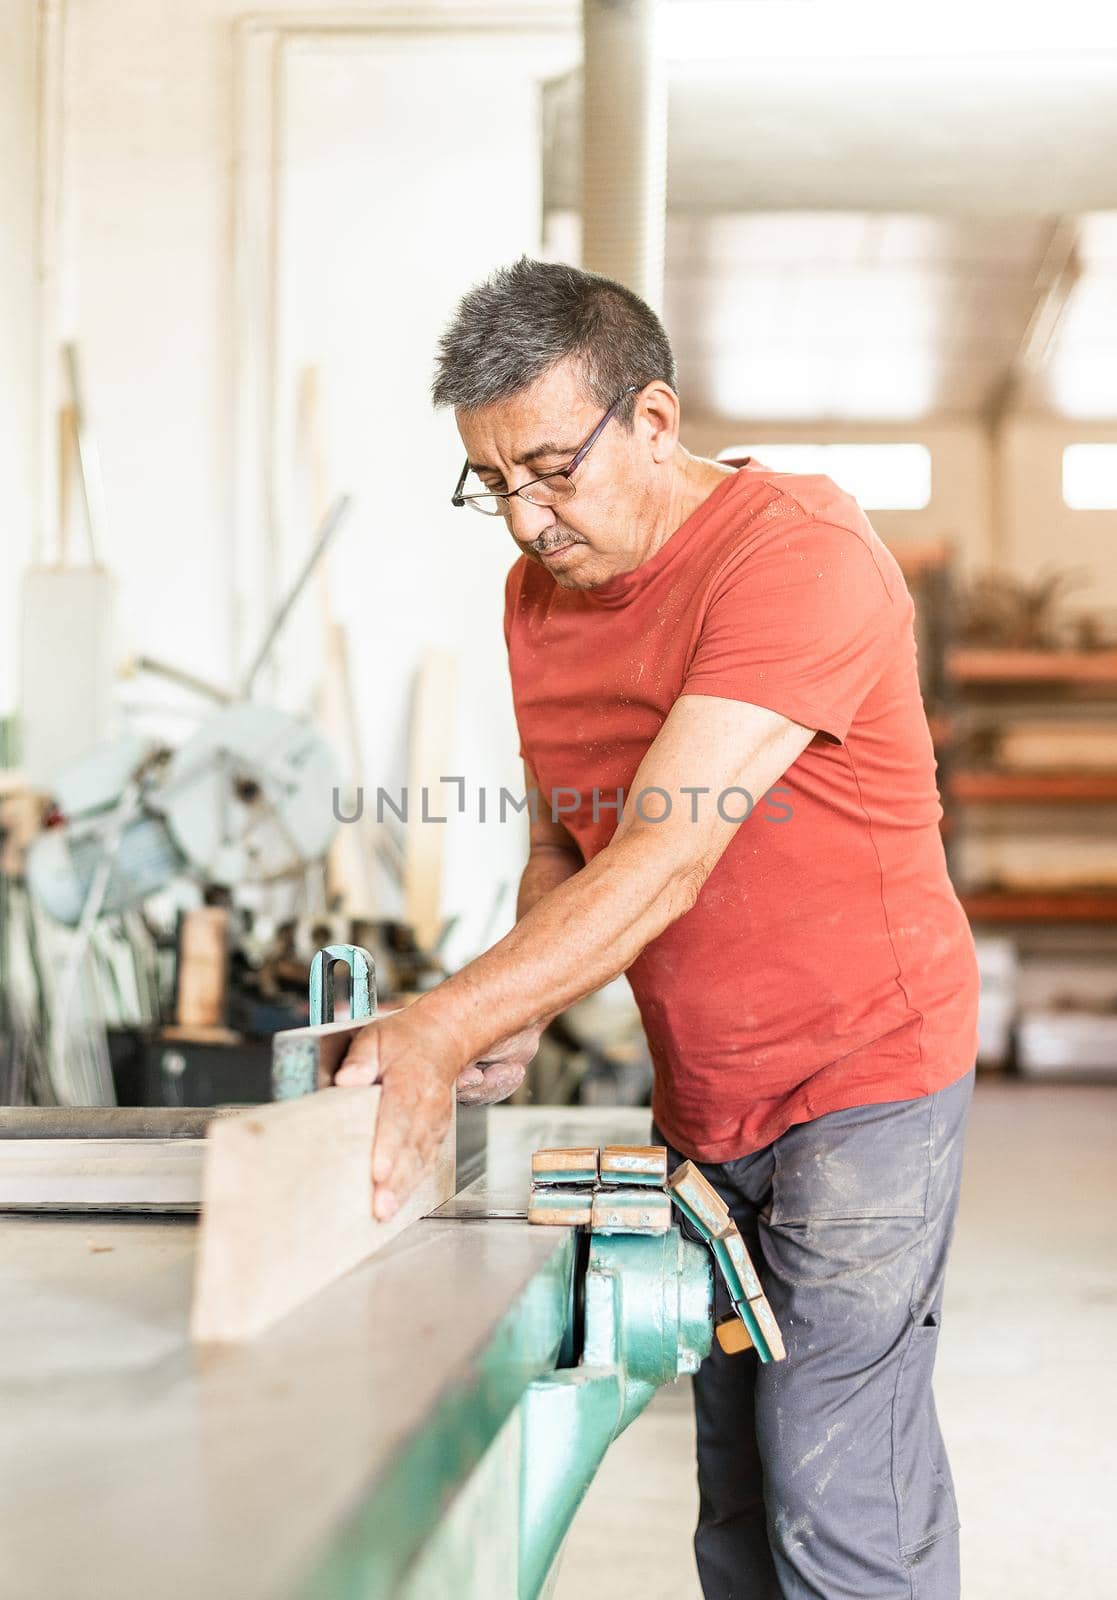 Adult man focused working manually with a wood planing machine, blurred vertical background